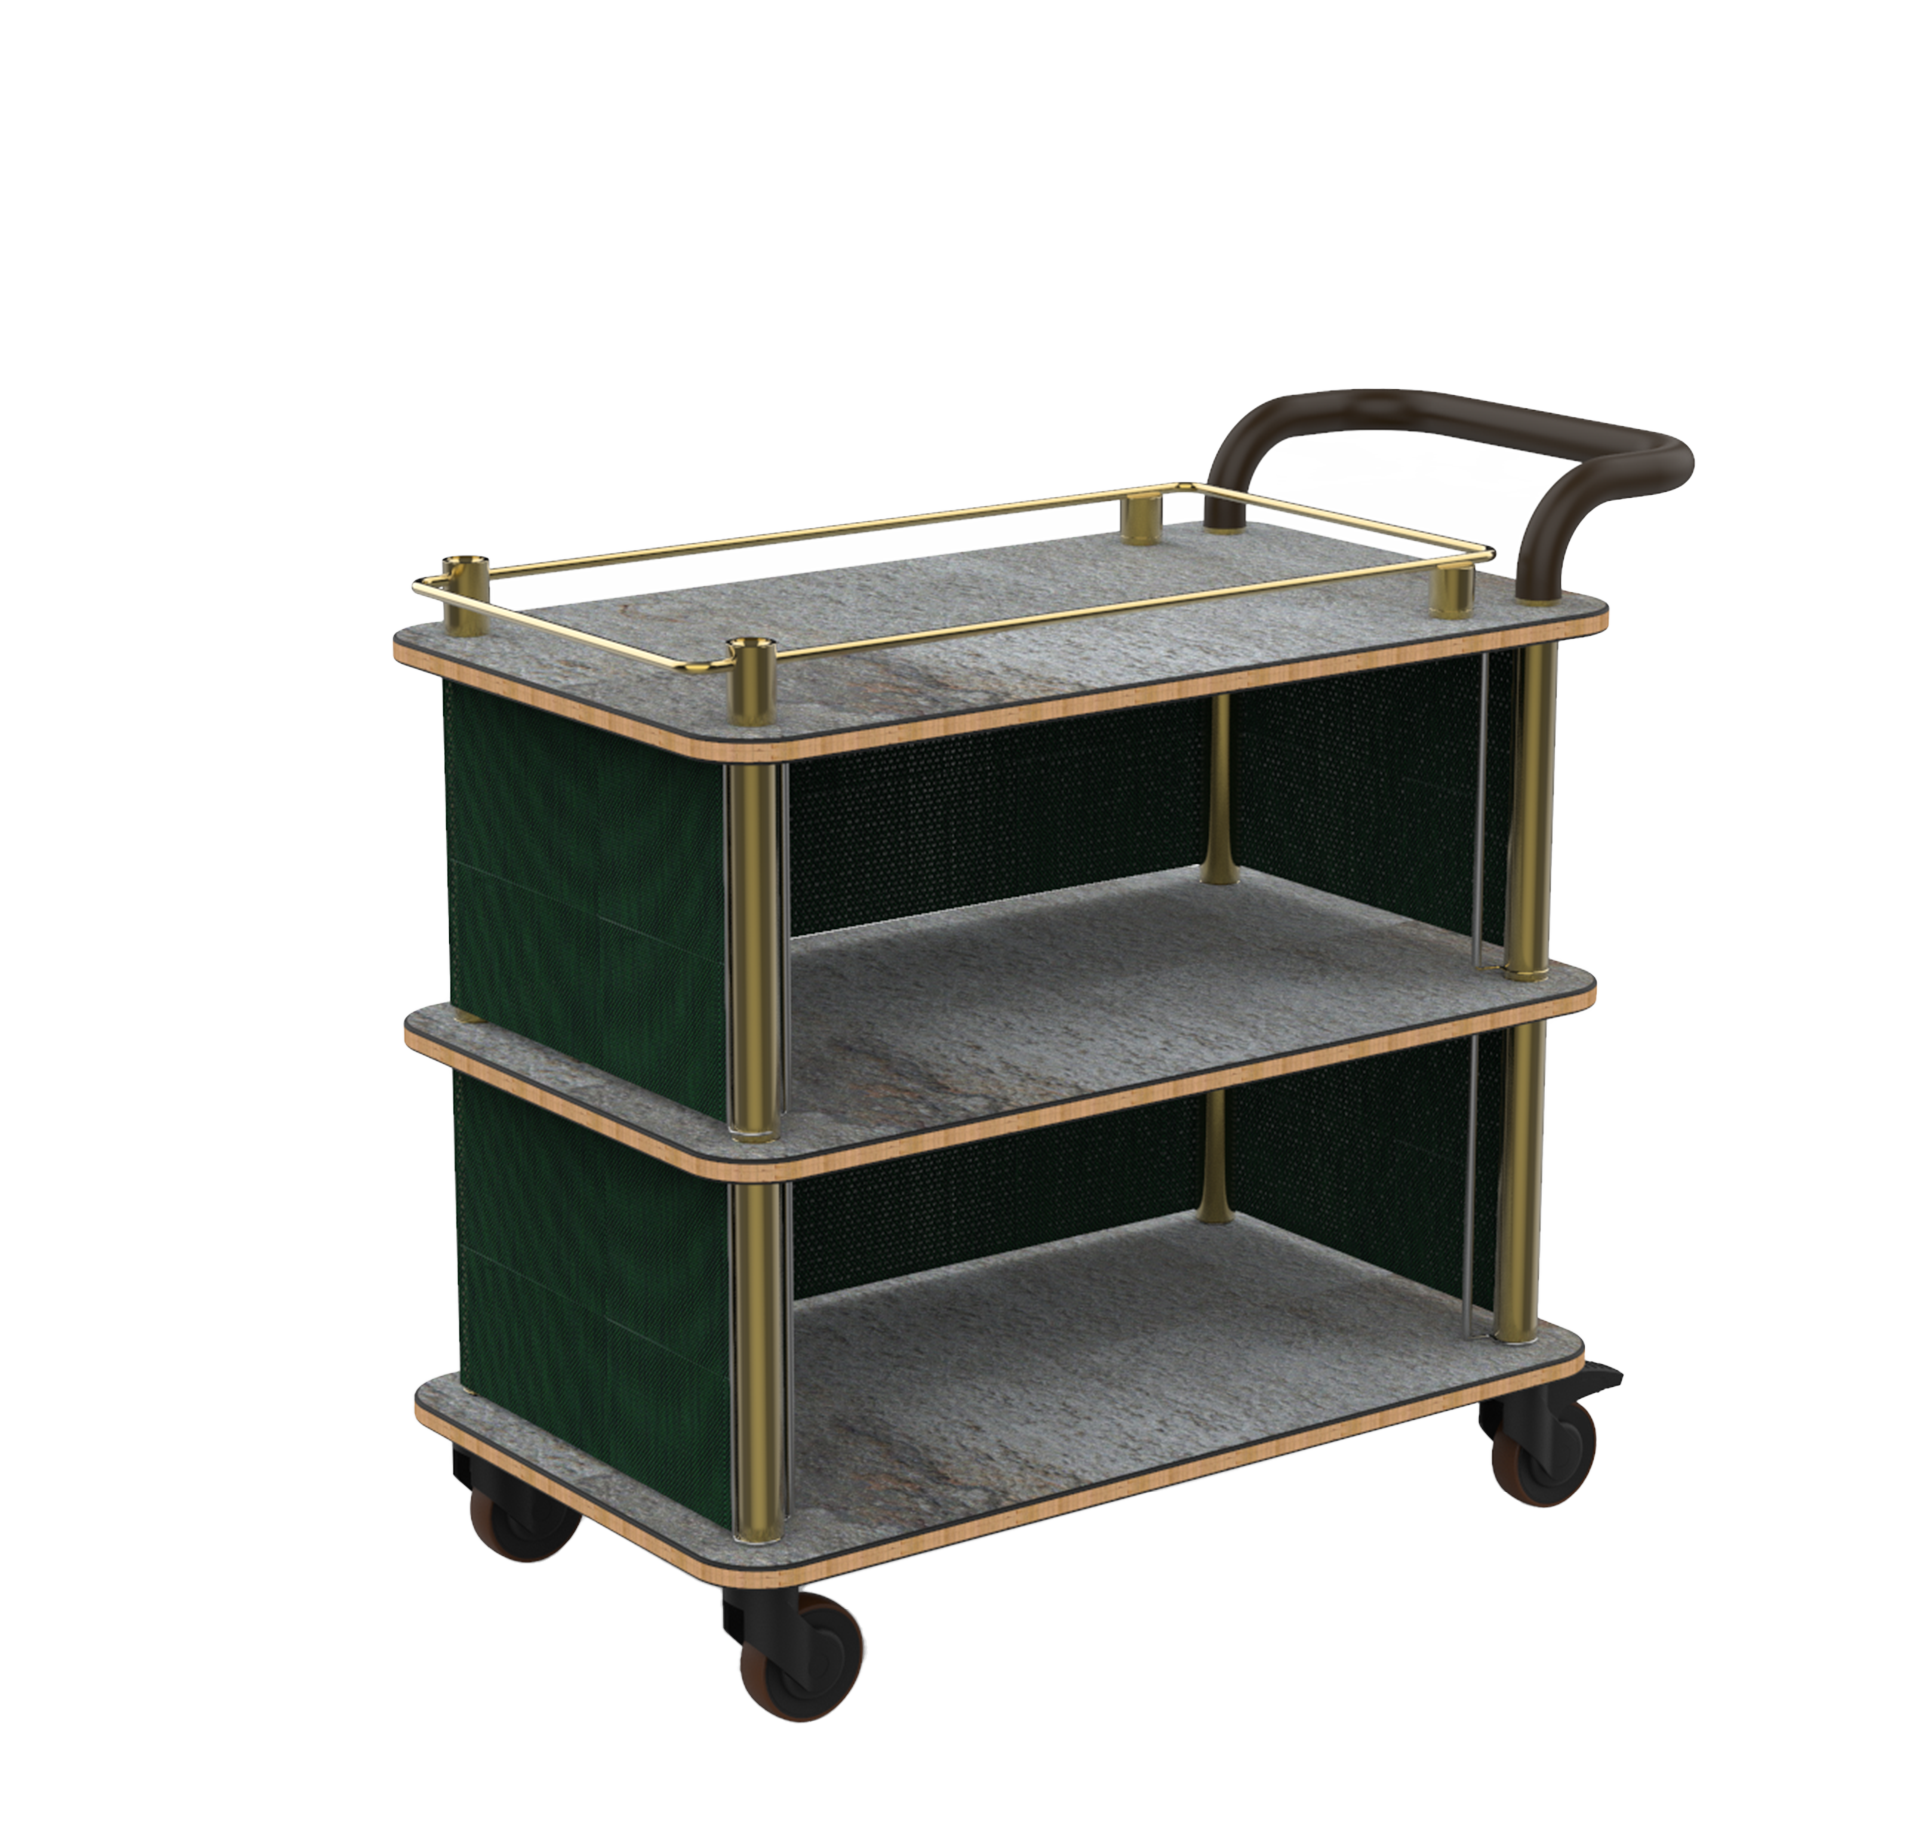 TOP BORDER CART WITH LEATHER HANDLE